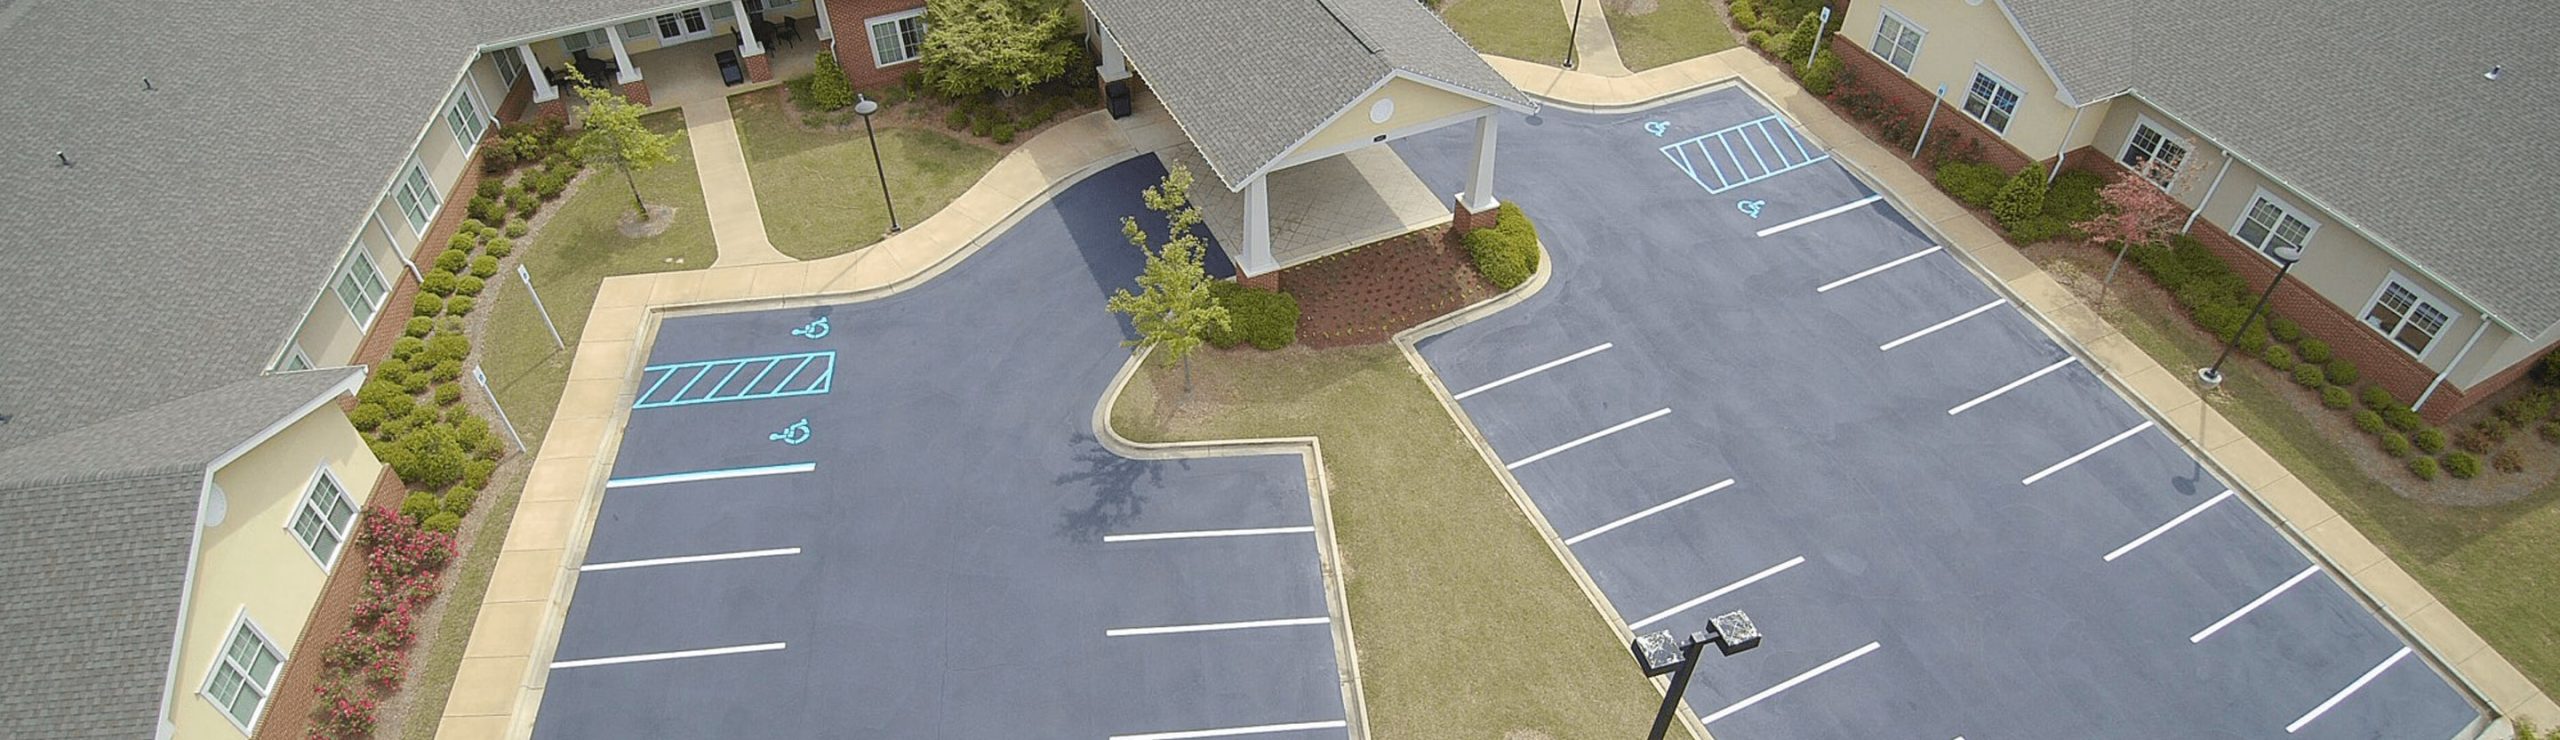 Parking Lot Striping Services image